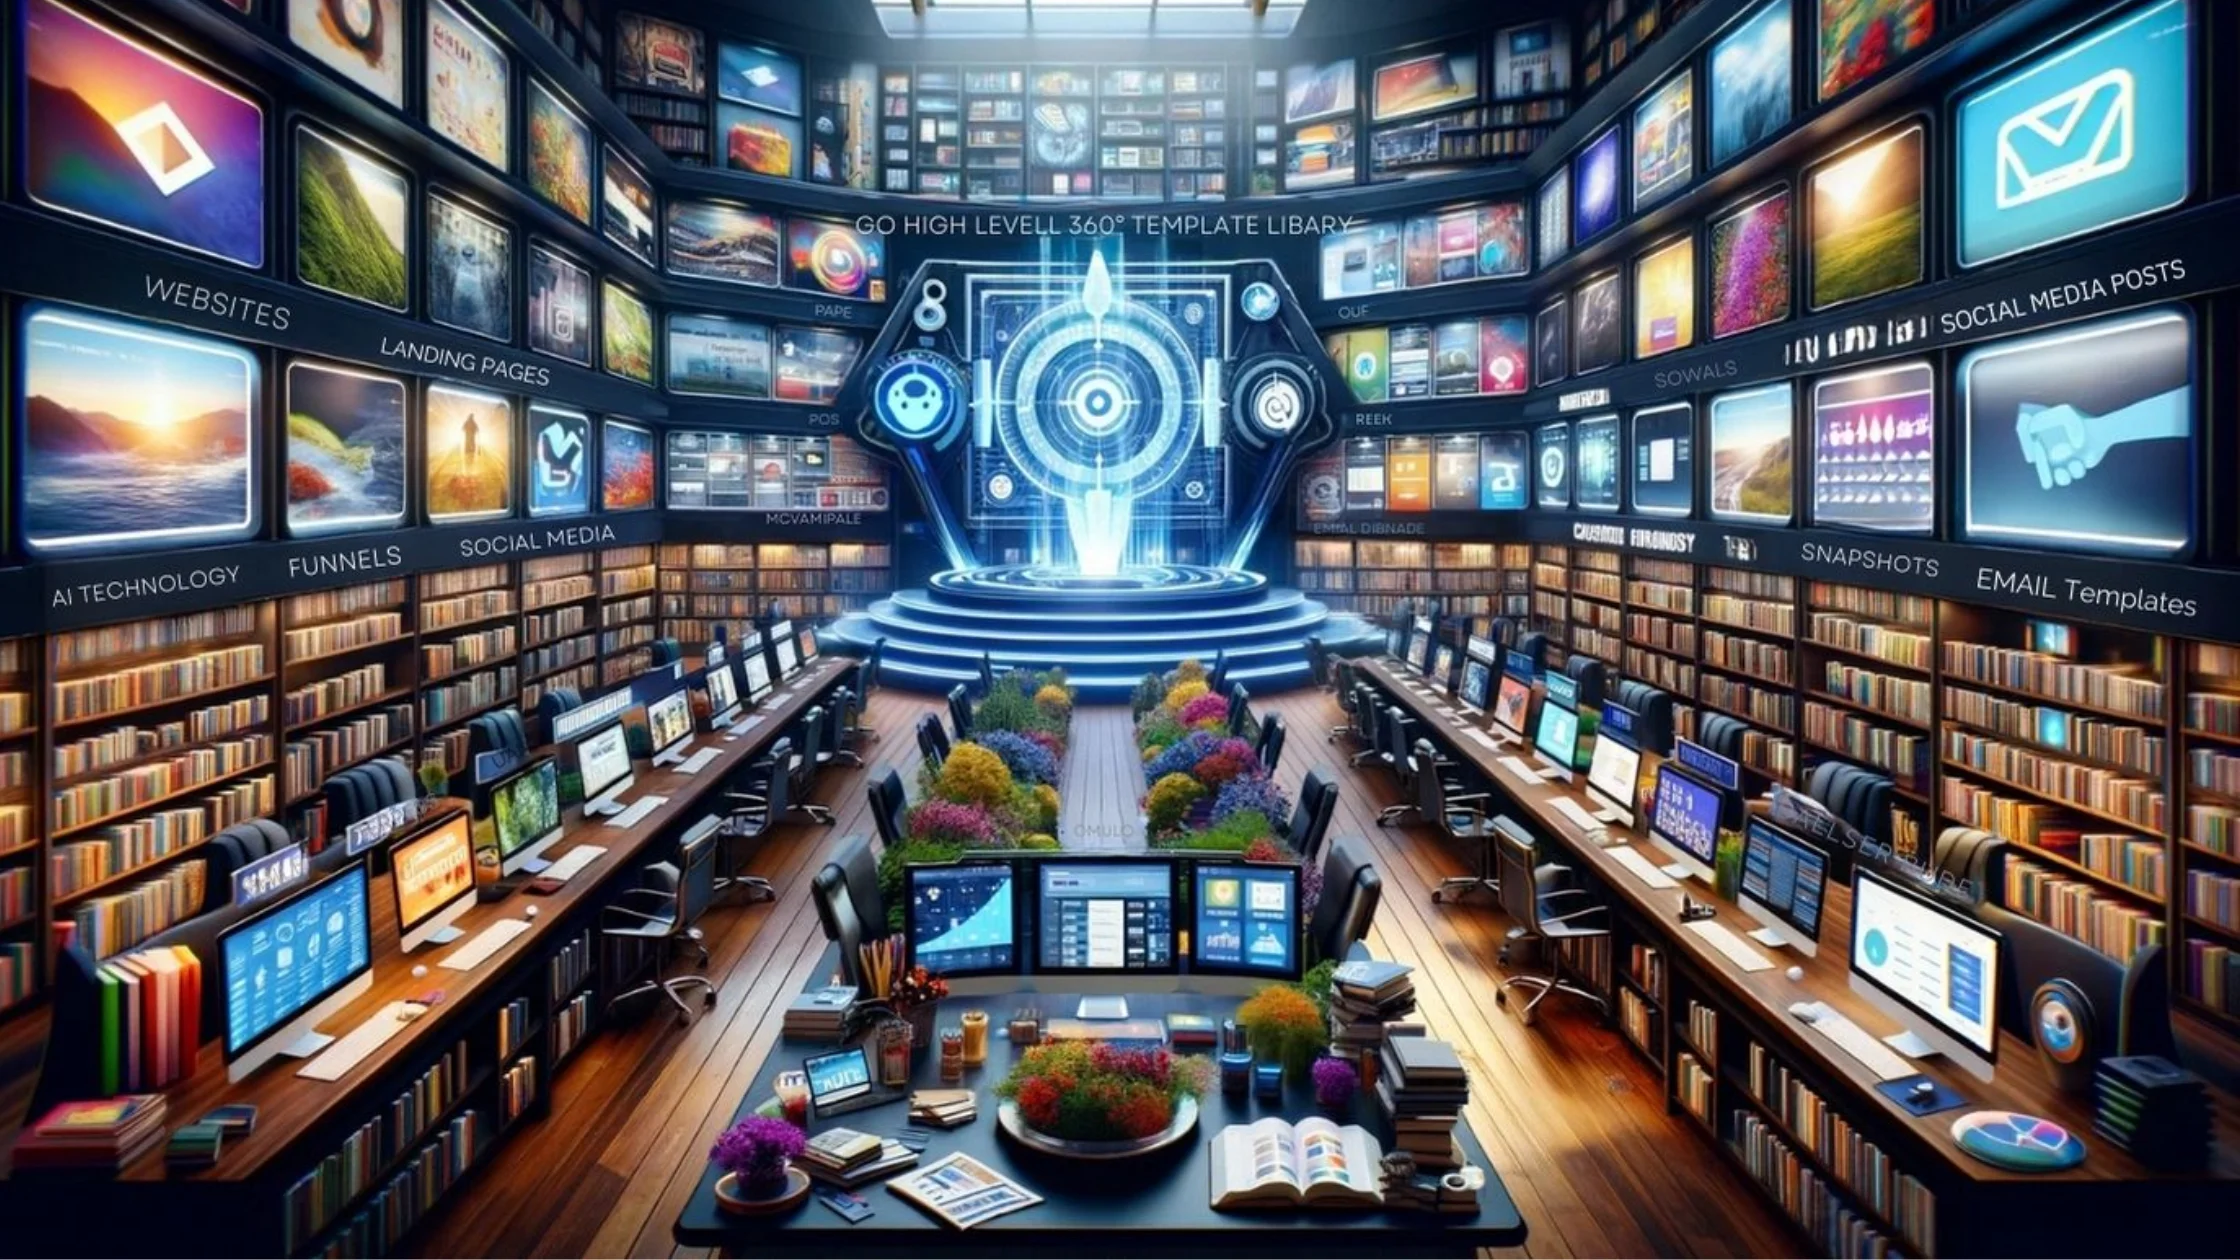 AI IMAGE THAT ILLISTARTES THE GOHIGHLEVEL360 TEMPLATE LIBRARY - A HUGE LIBRARY WITH A HUGE STUDY ROOM AND MASSIVE AMOUNTS OF BOOK AND COMPUTERS 